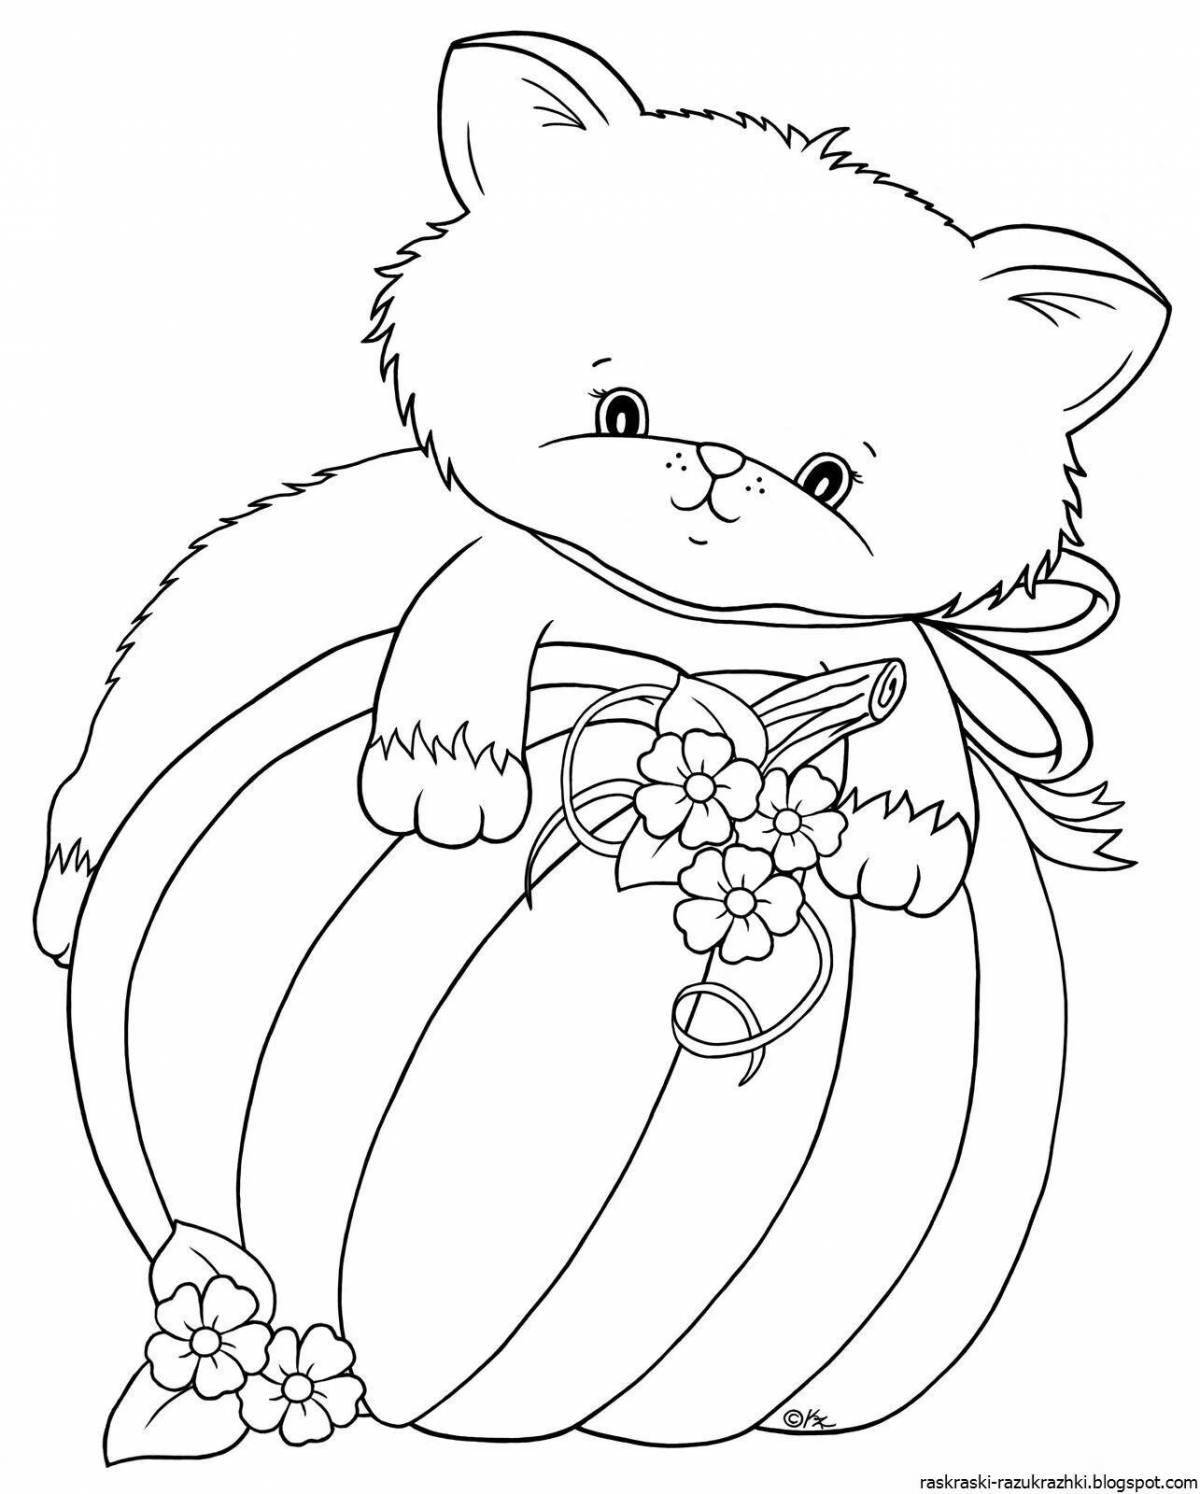 Exotic animal coloring pages for kids